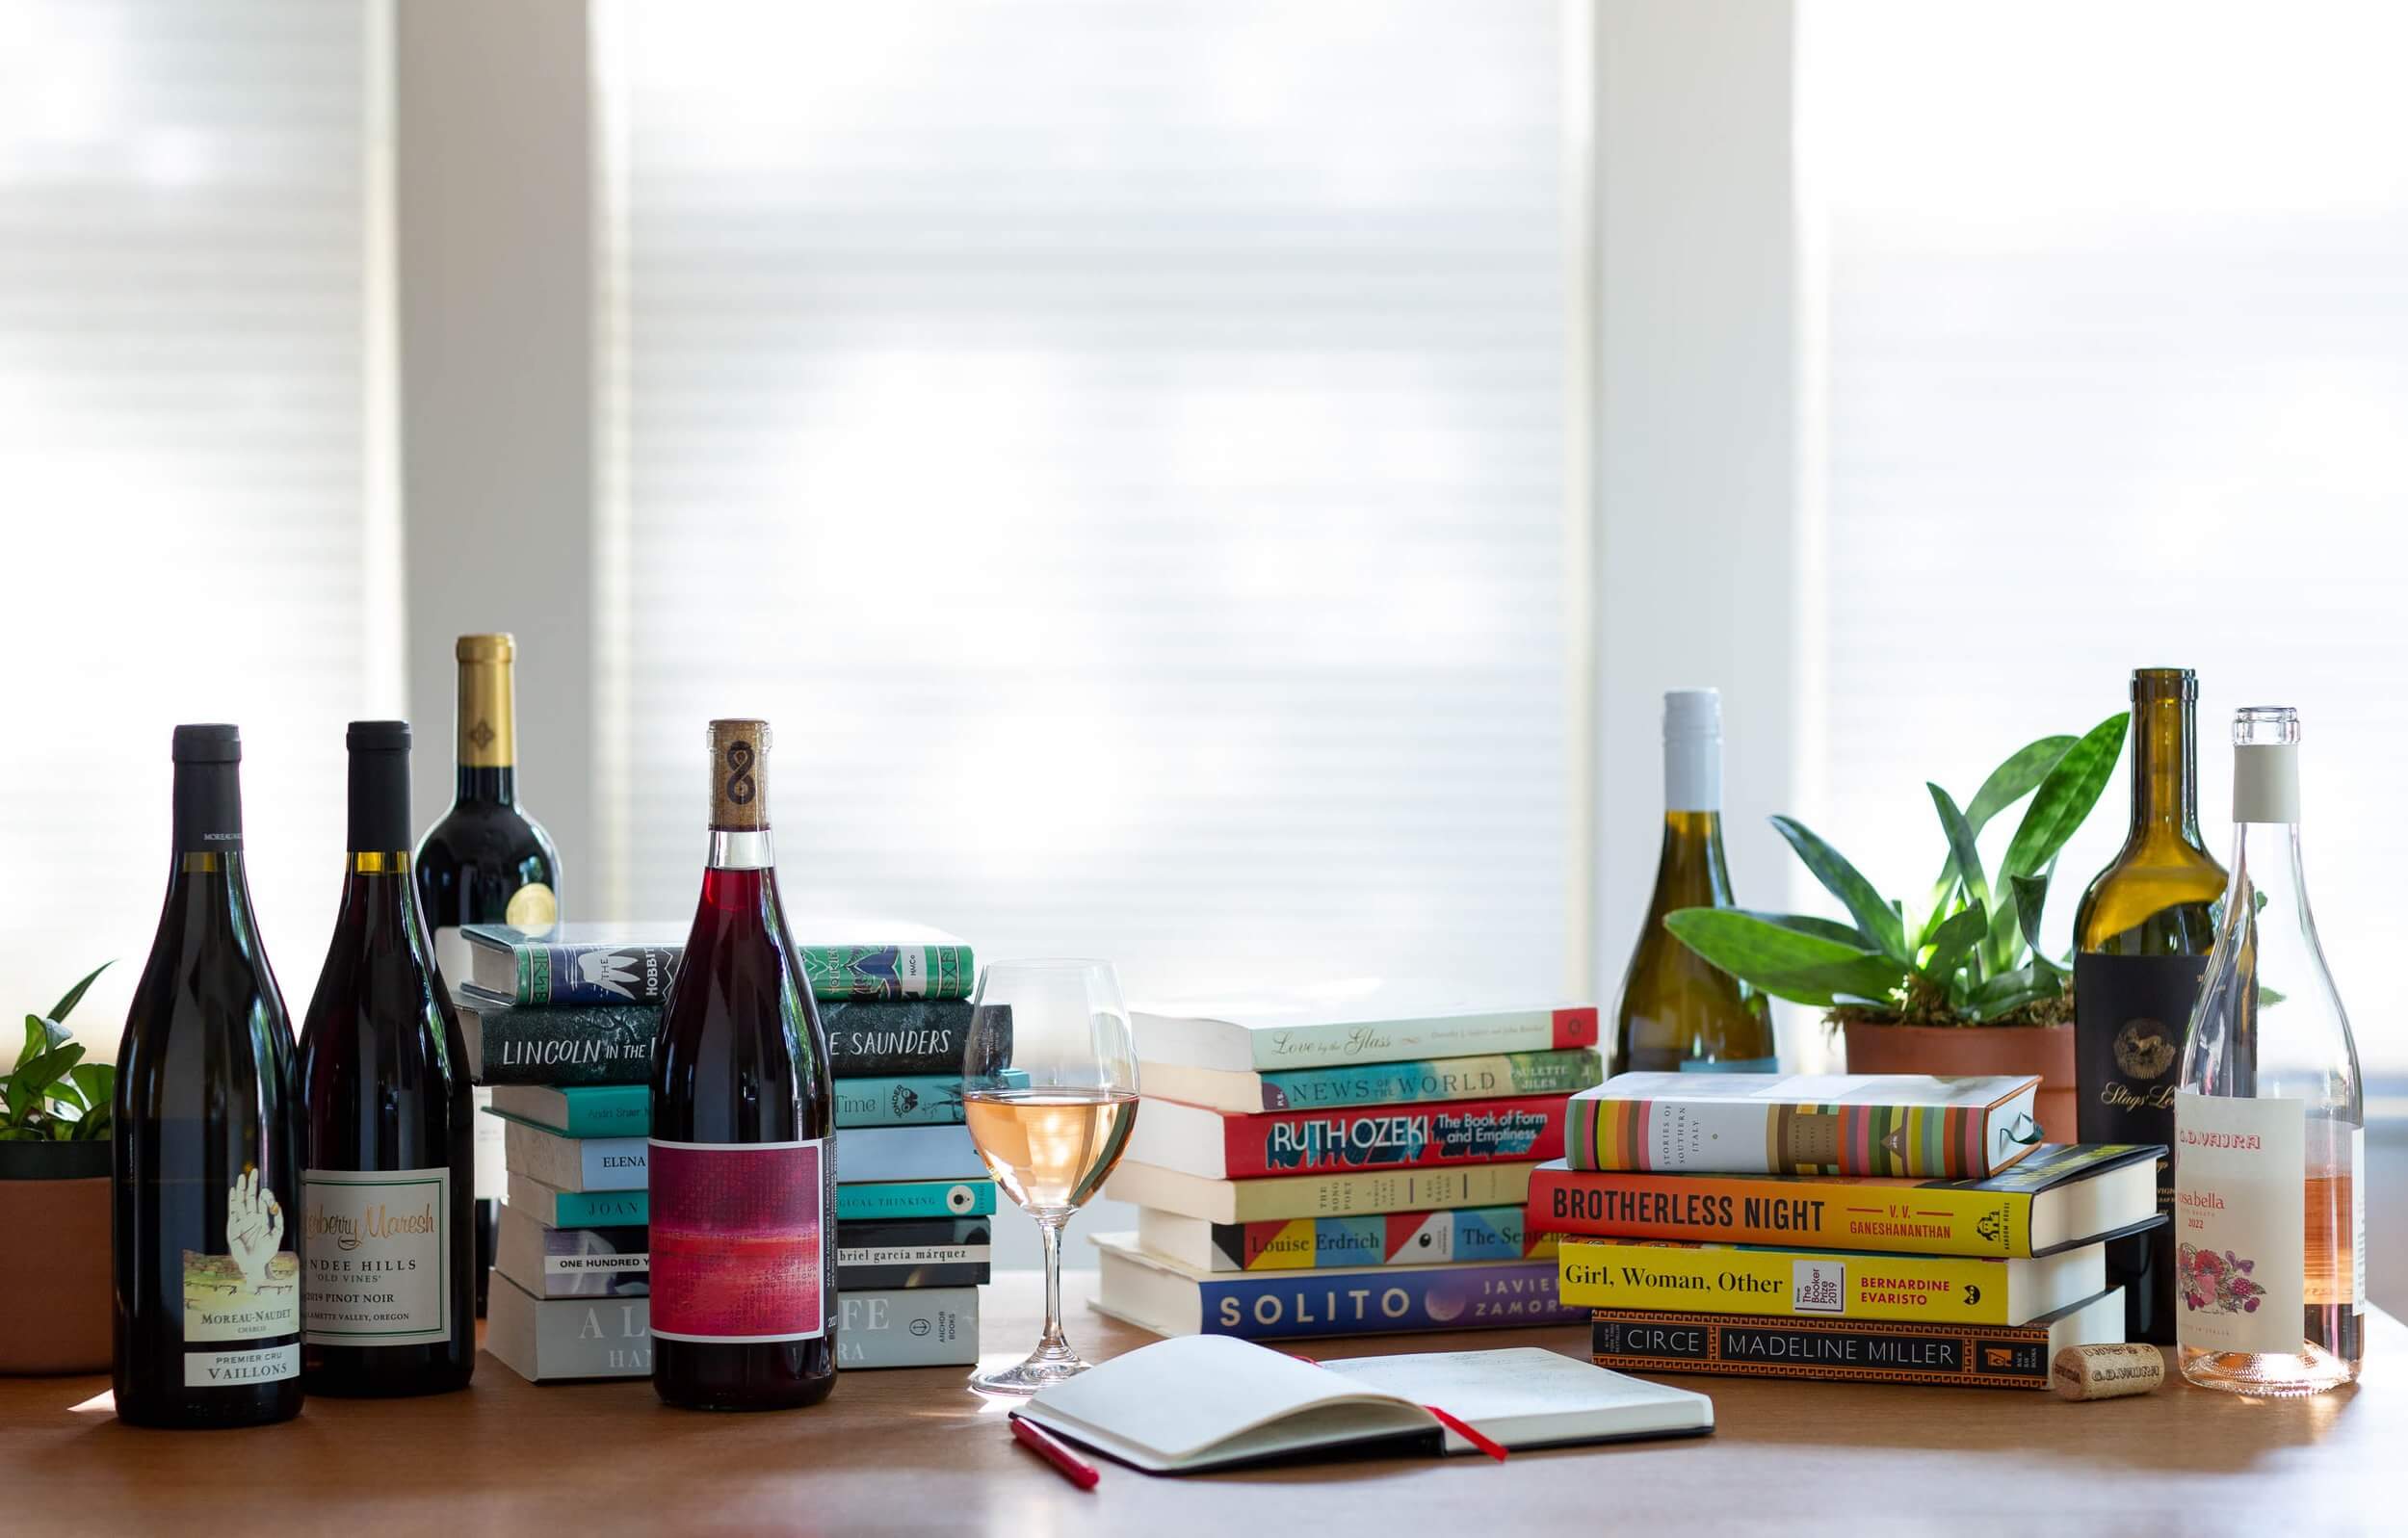 Bookworms and Wine romantic birthday ideas for him